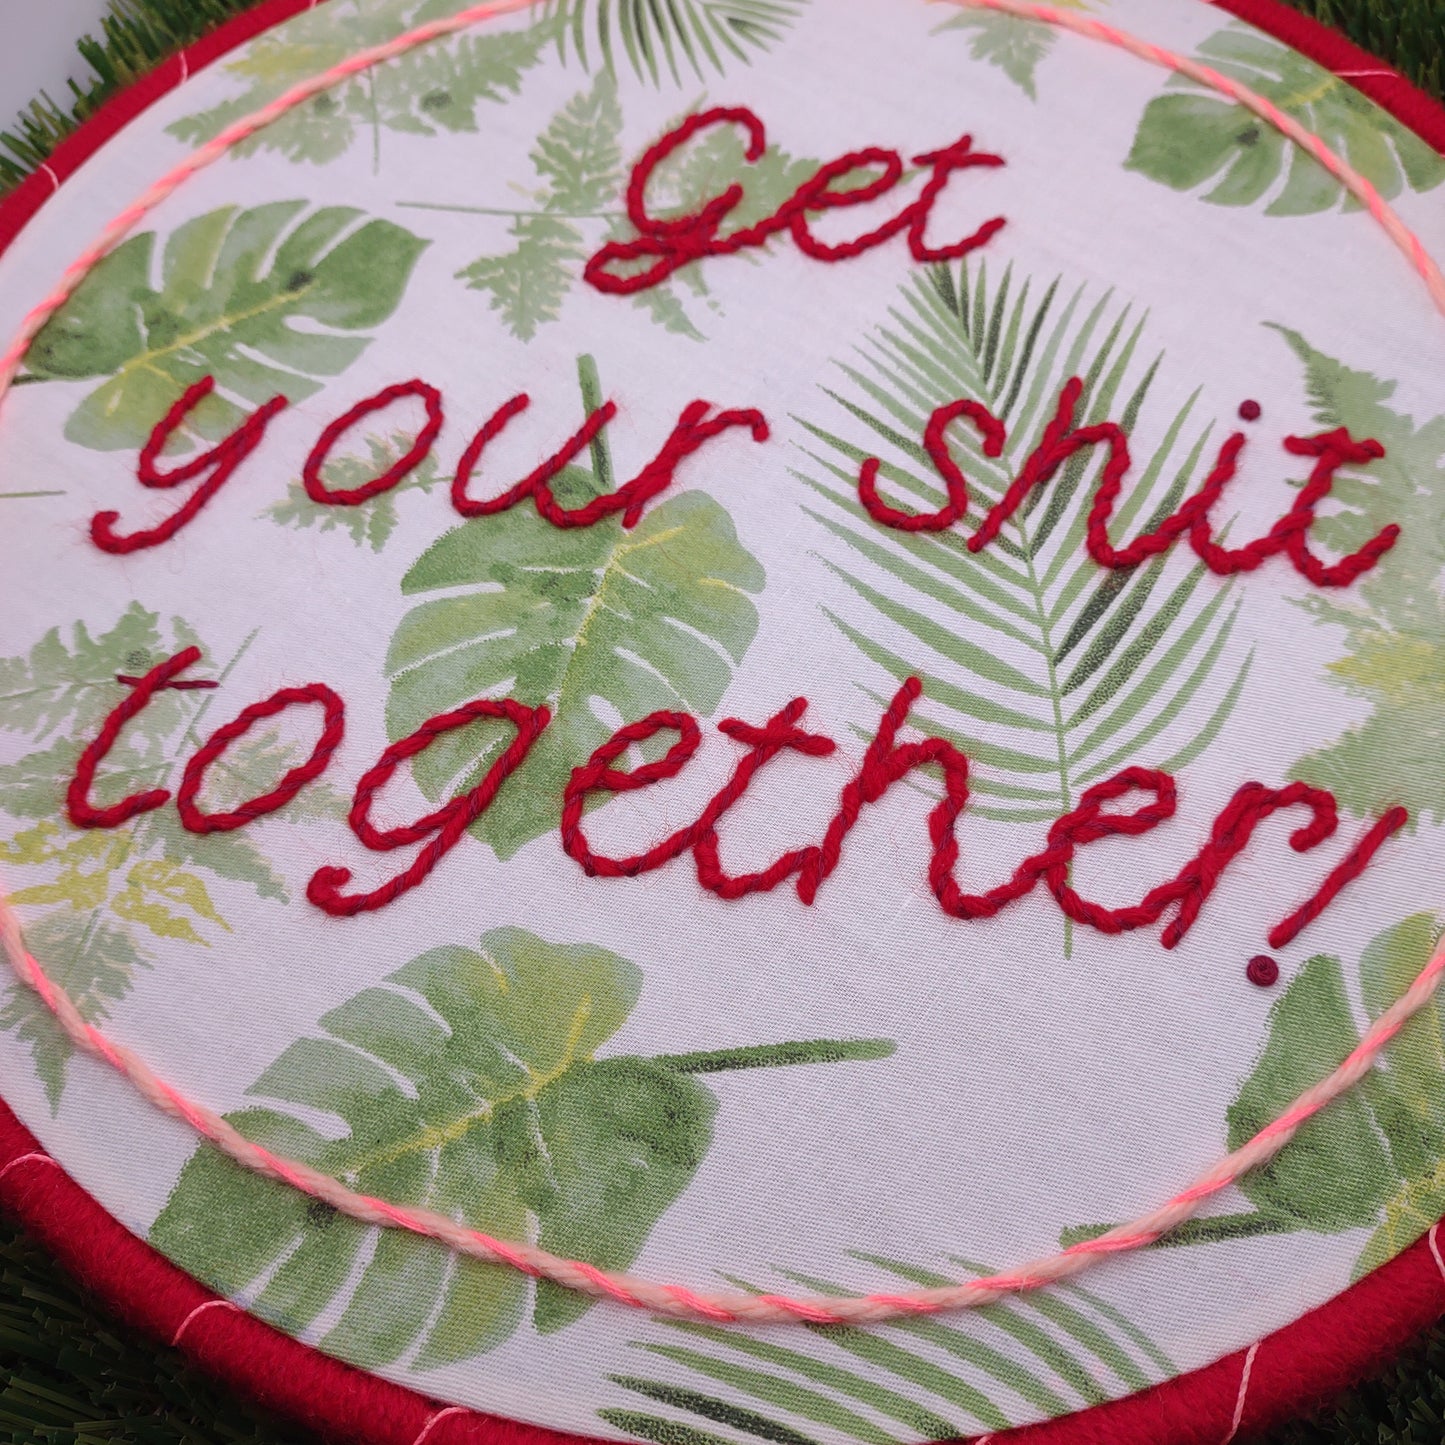 "Get your shit together" Handmade Embroidery 10 inch hoop